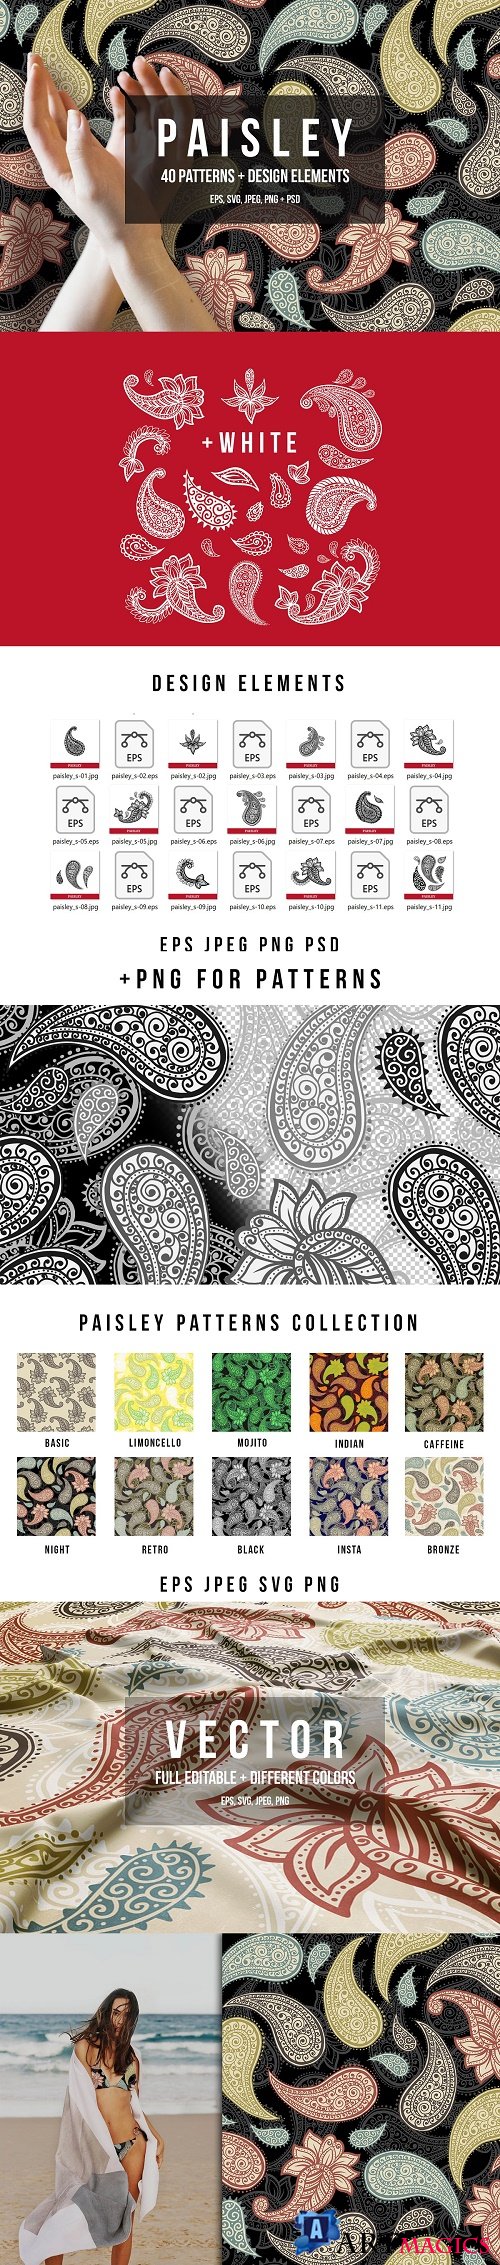 Paisley Patterns Collection - 3702274